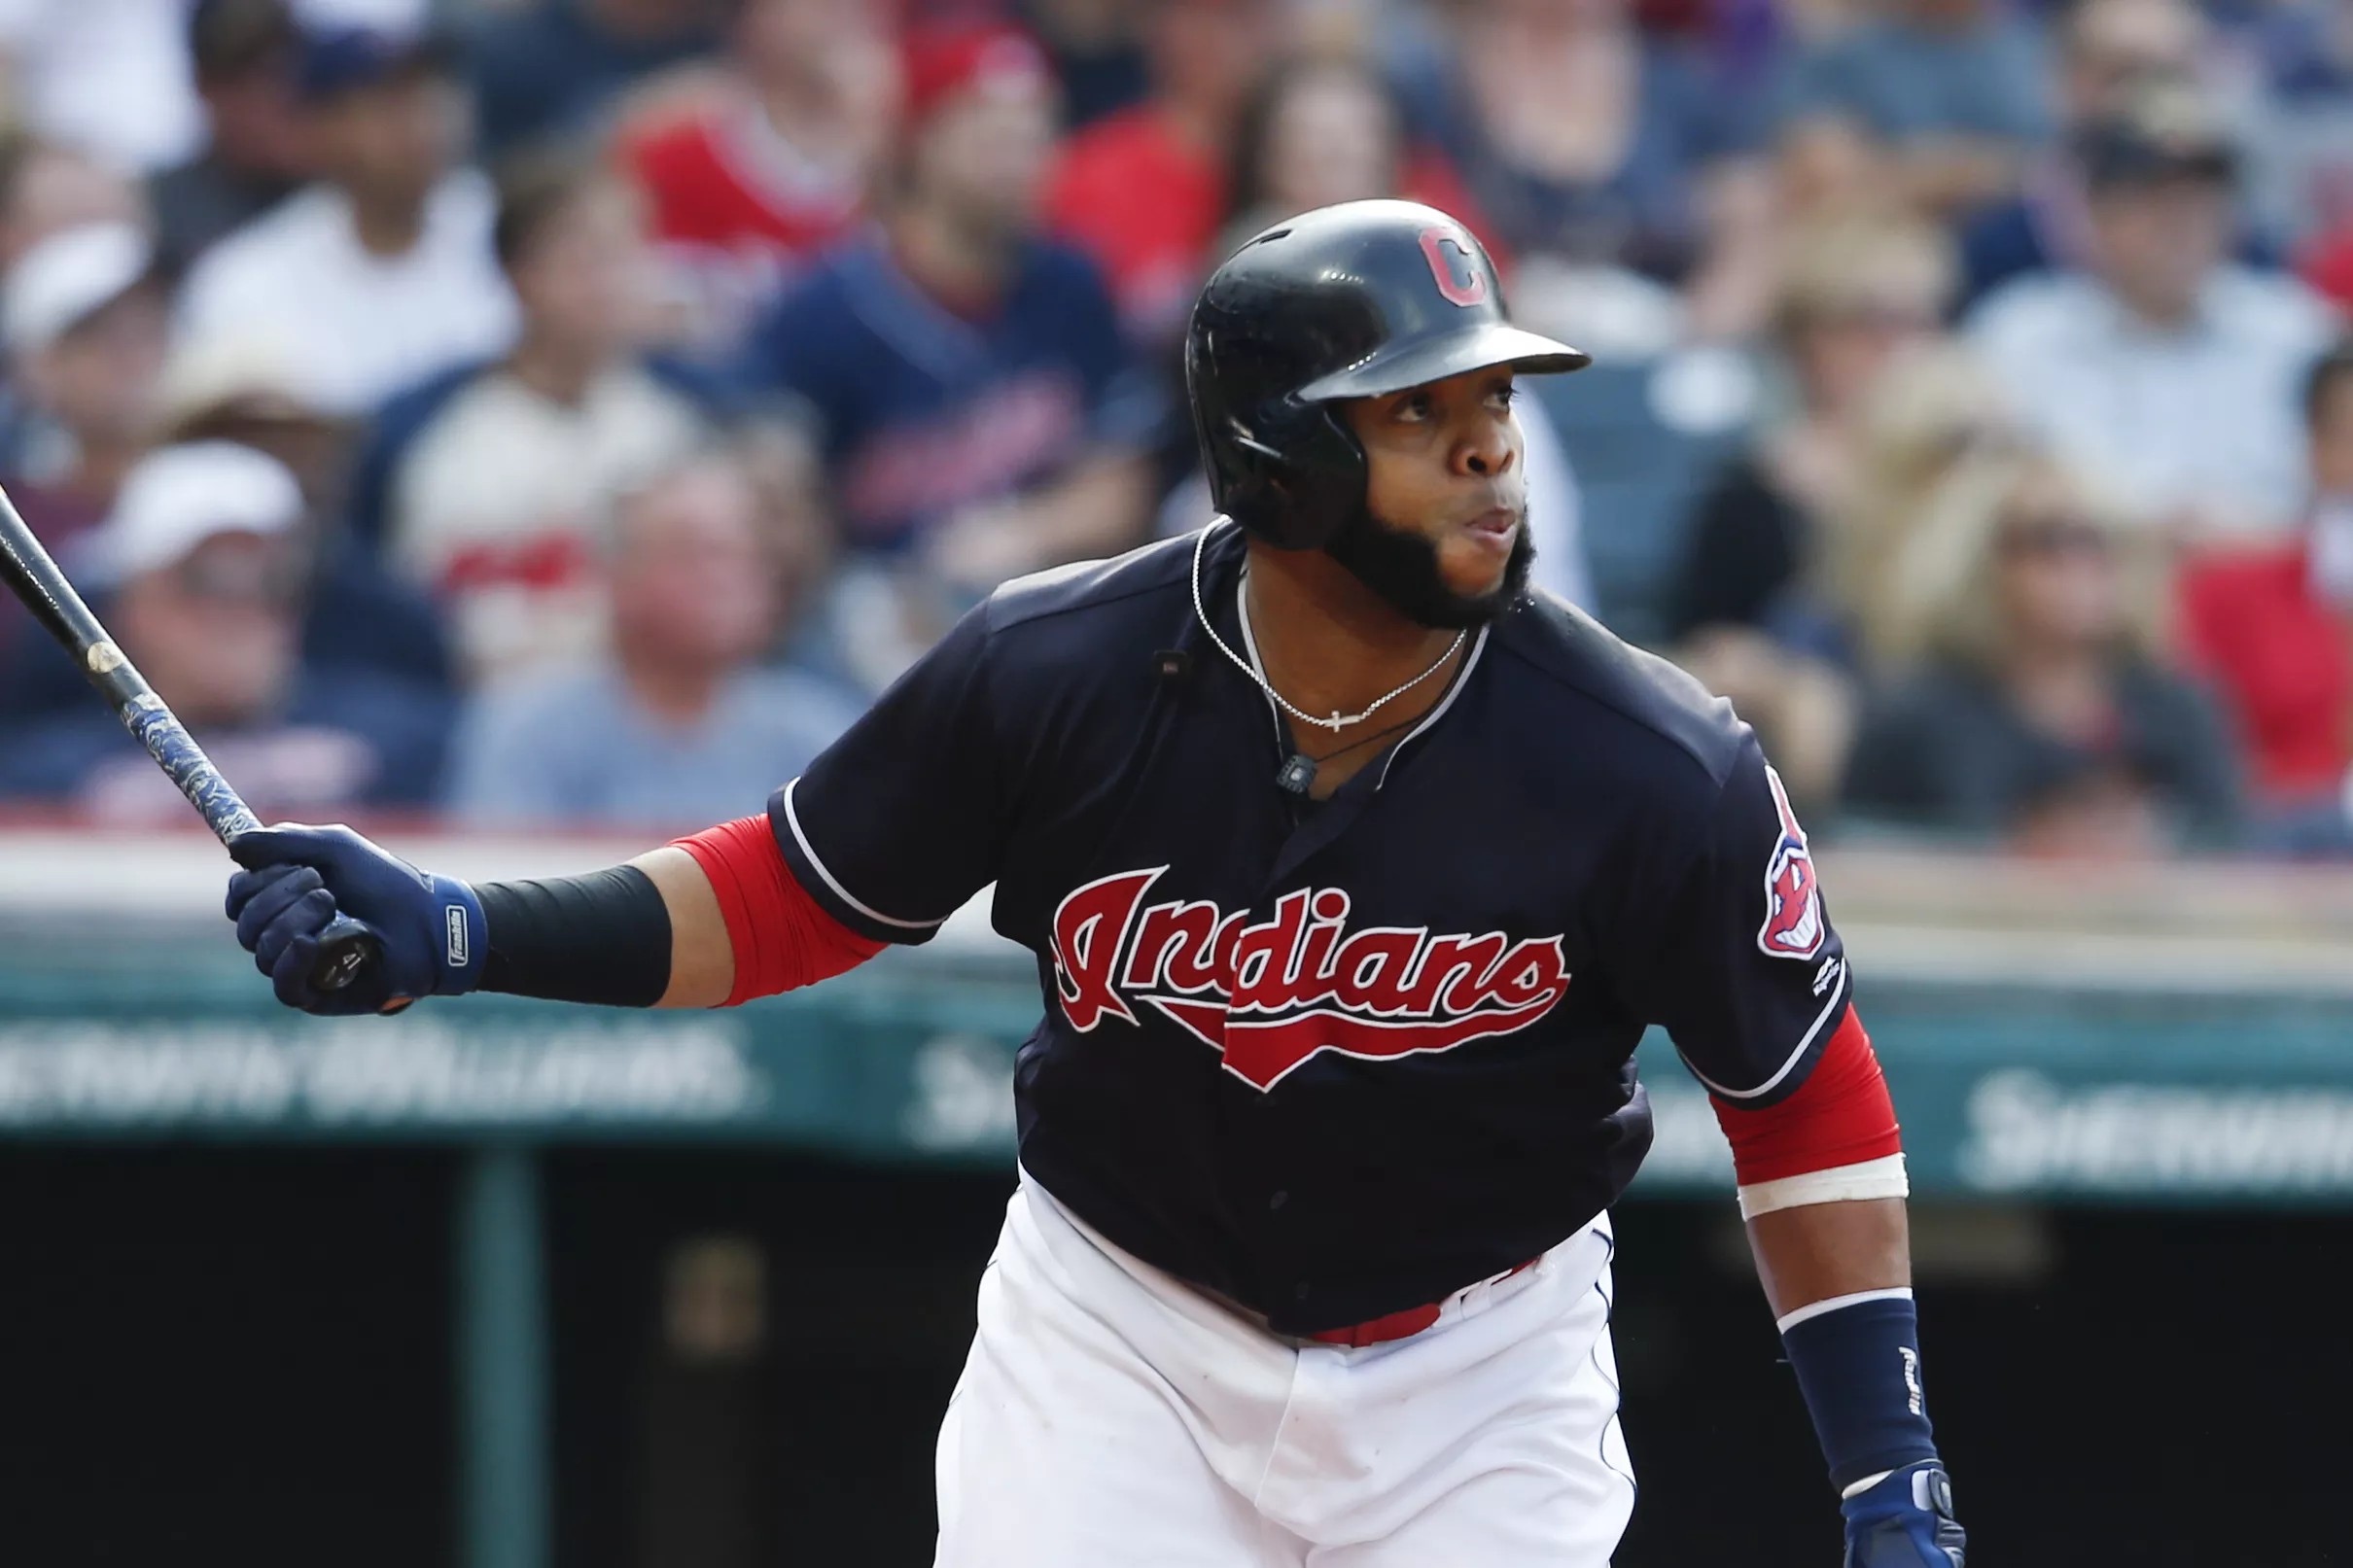 Phillies sign former Indians 1B Carlos Santana to 3-year deal